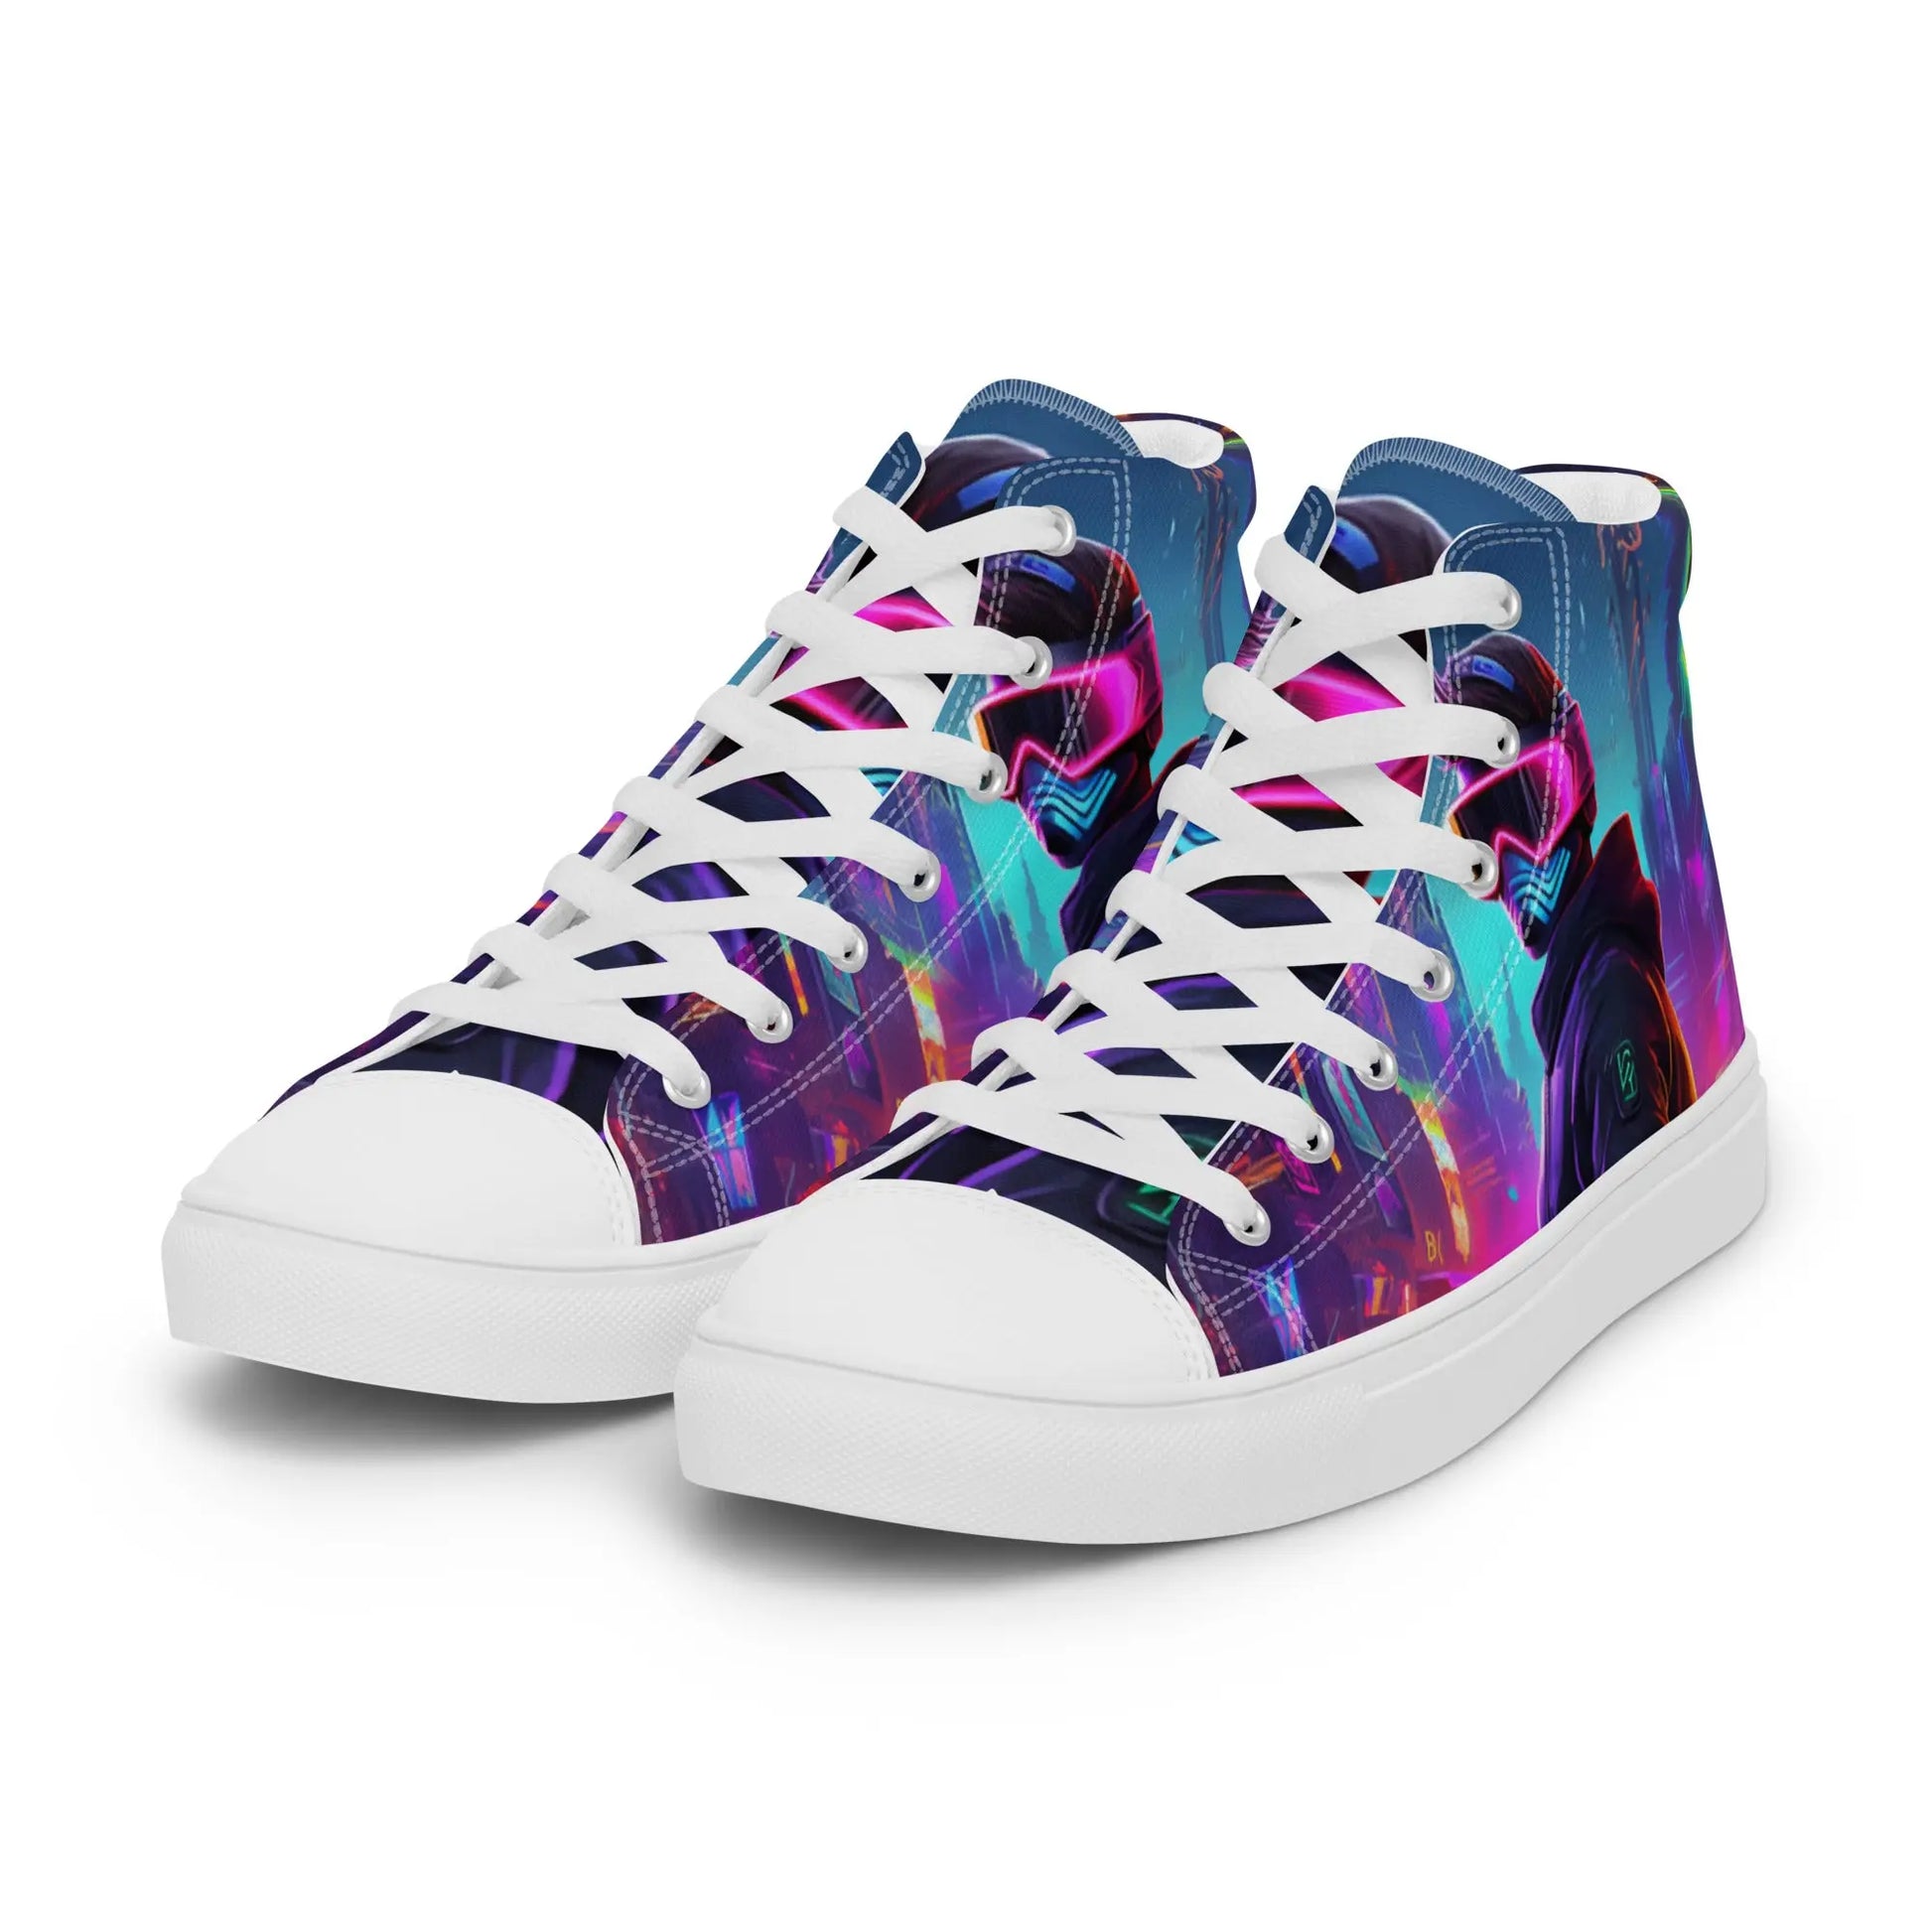 CityGlow High Top Sneakers: AI-Engineered, Unleash Your Gaming Style with Unisex, Durable, Comfortable Urban-Inspired Design Kinetic Footwear